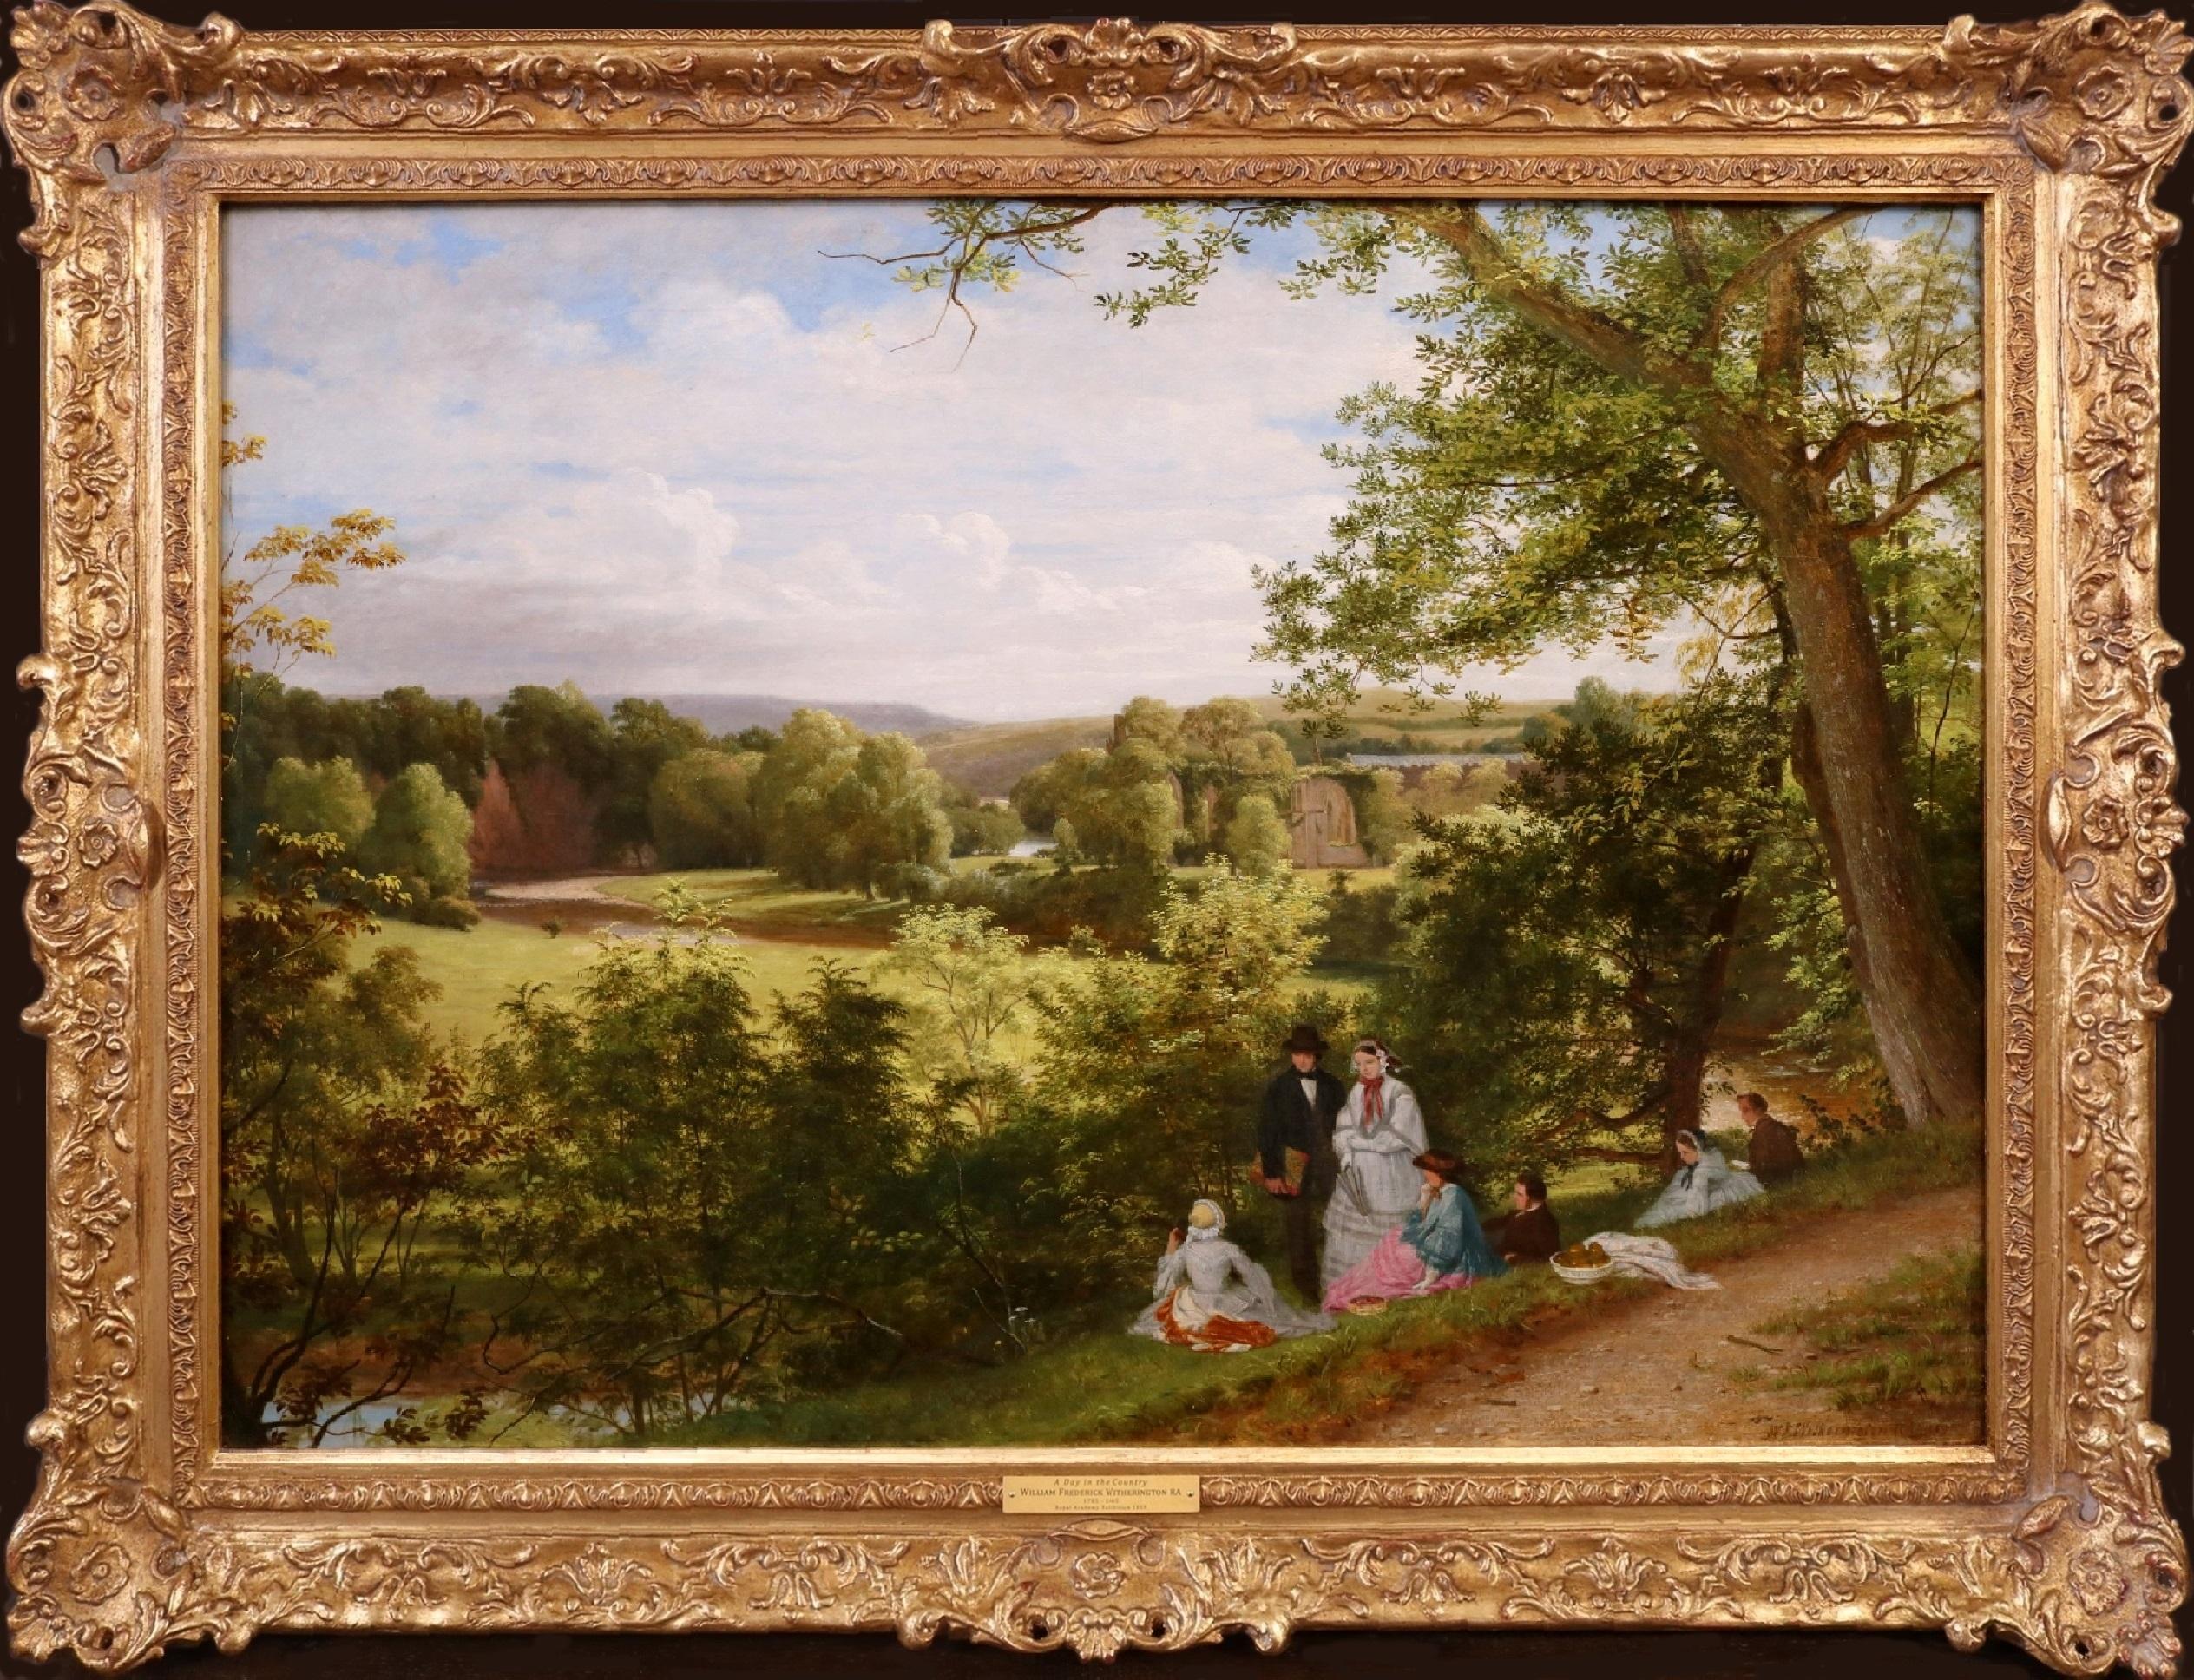 ‘A Day in the Country’ by William Frederick Witherington R.A. (1785-1865).

The painting – which depicts a group of Victorian figures on a summer’s day before an extensive landscape of Wharfedale and the ruins of Bolton Priory – is signed by the